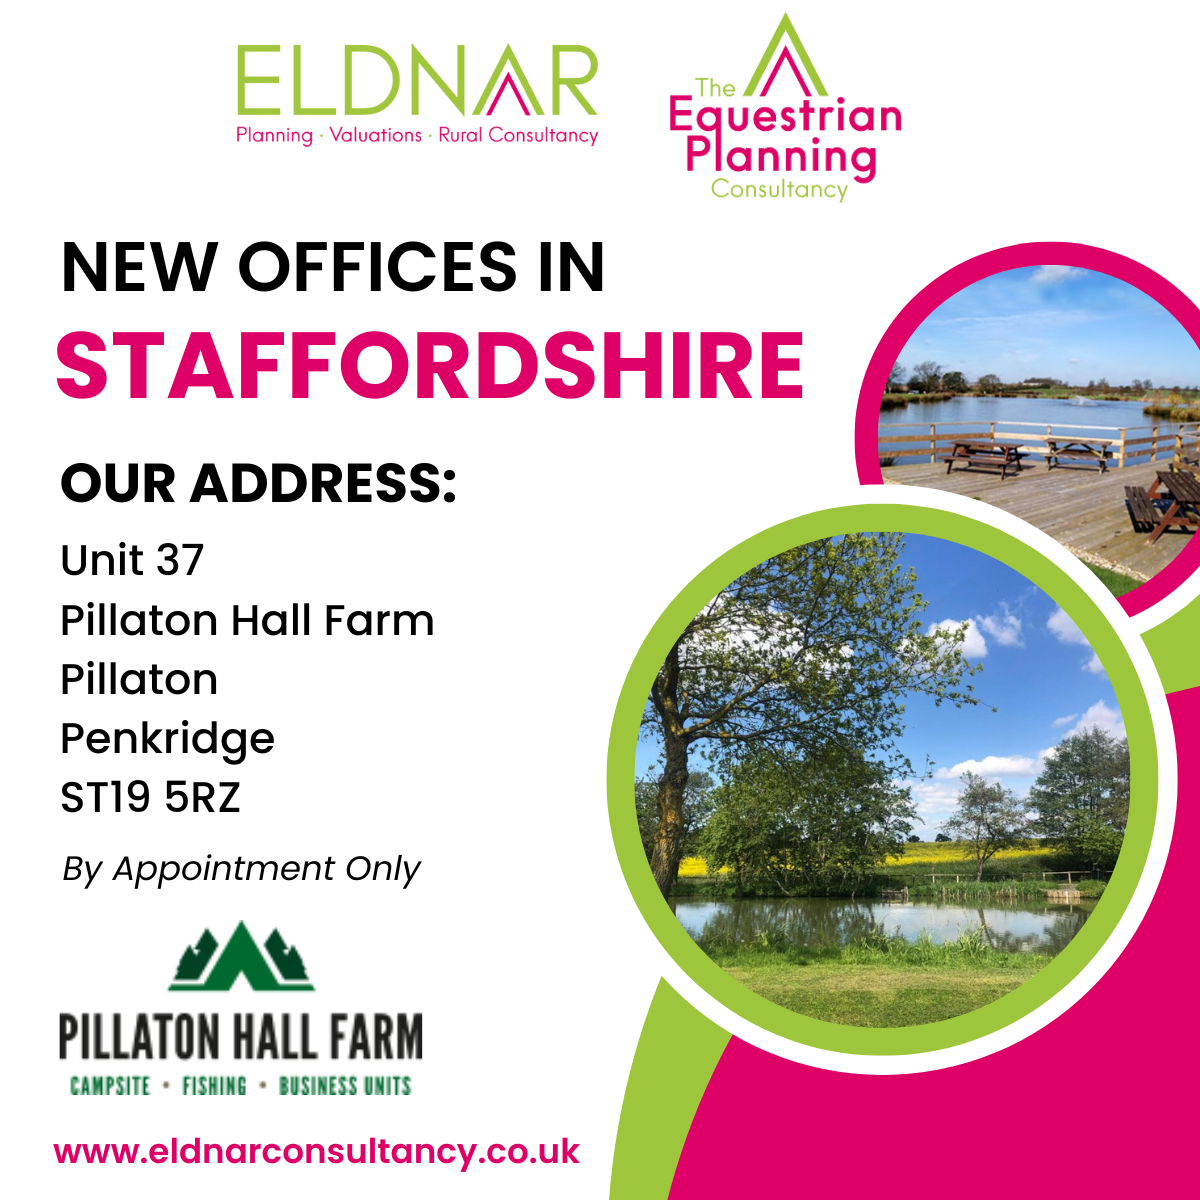 NEW OFFICES IN STAFFORDSHIRE